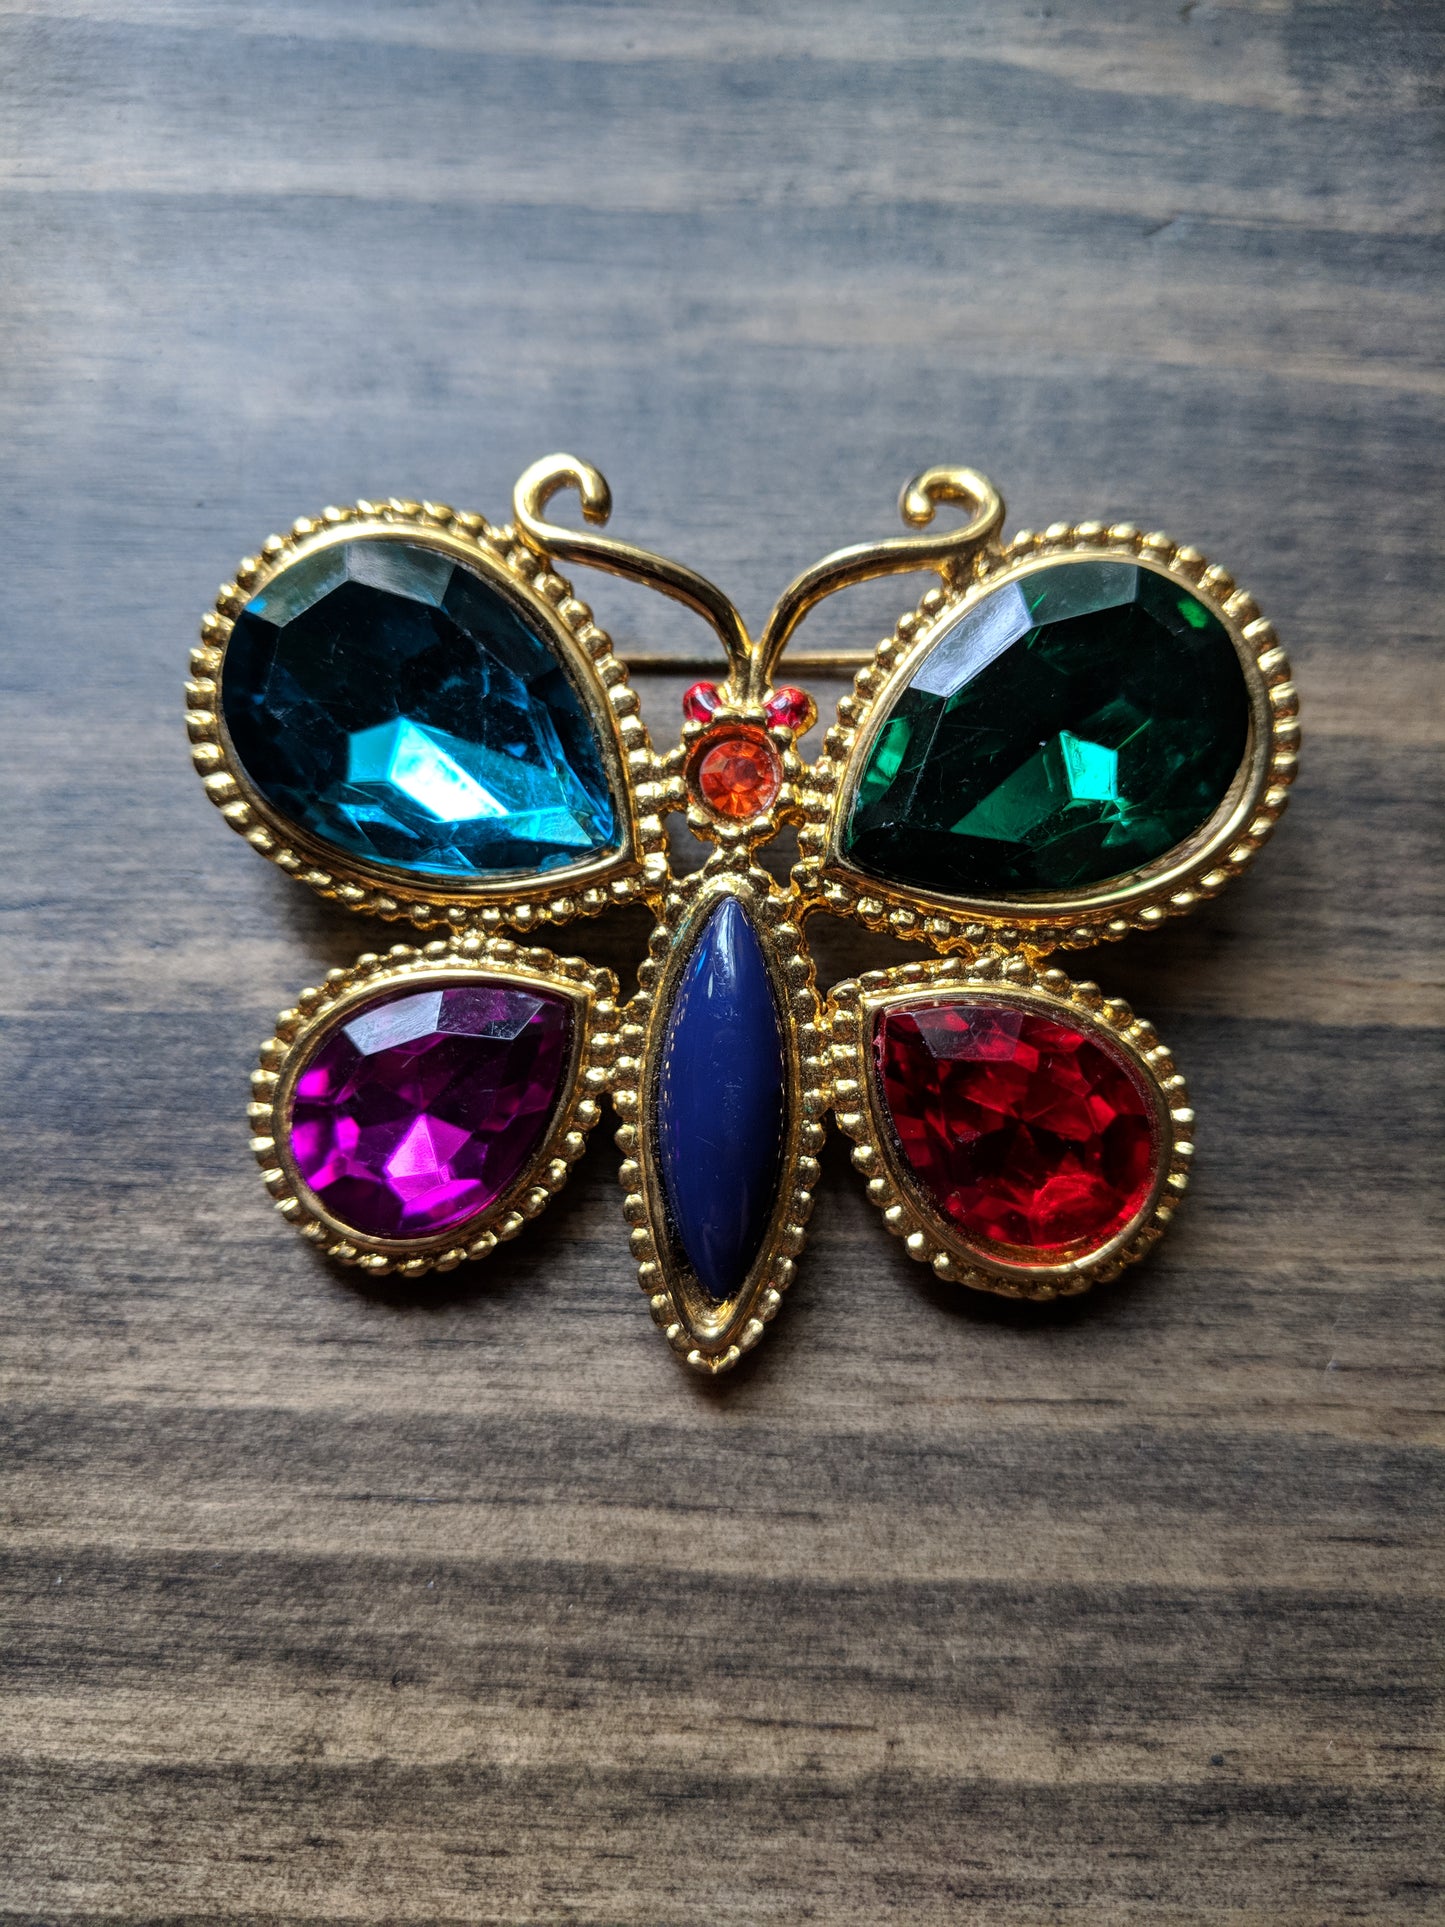 Vintage Brooch- Large Gold Tone Butterfly w/ Jewel Colored Plastic Accent